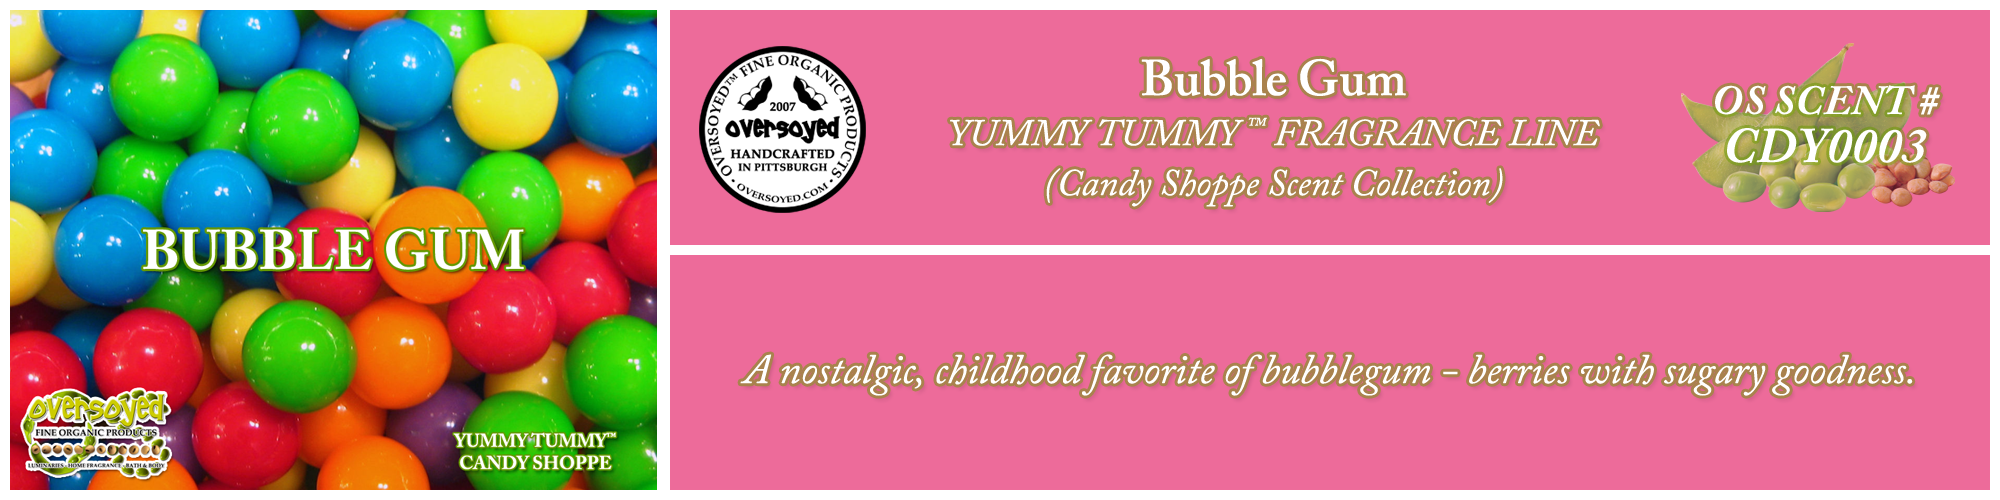 Bubble Gum Handcrafted Products Collection